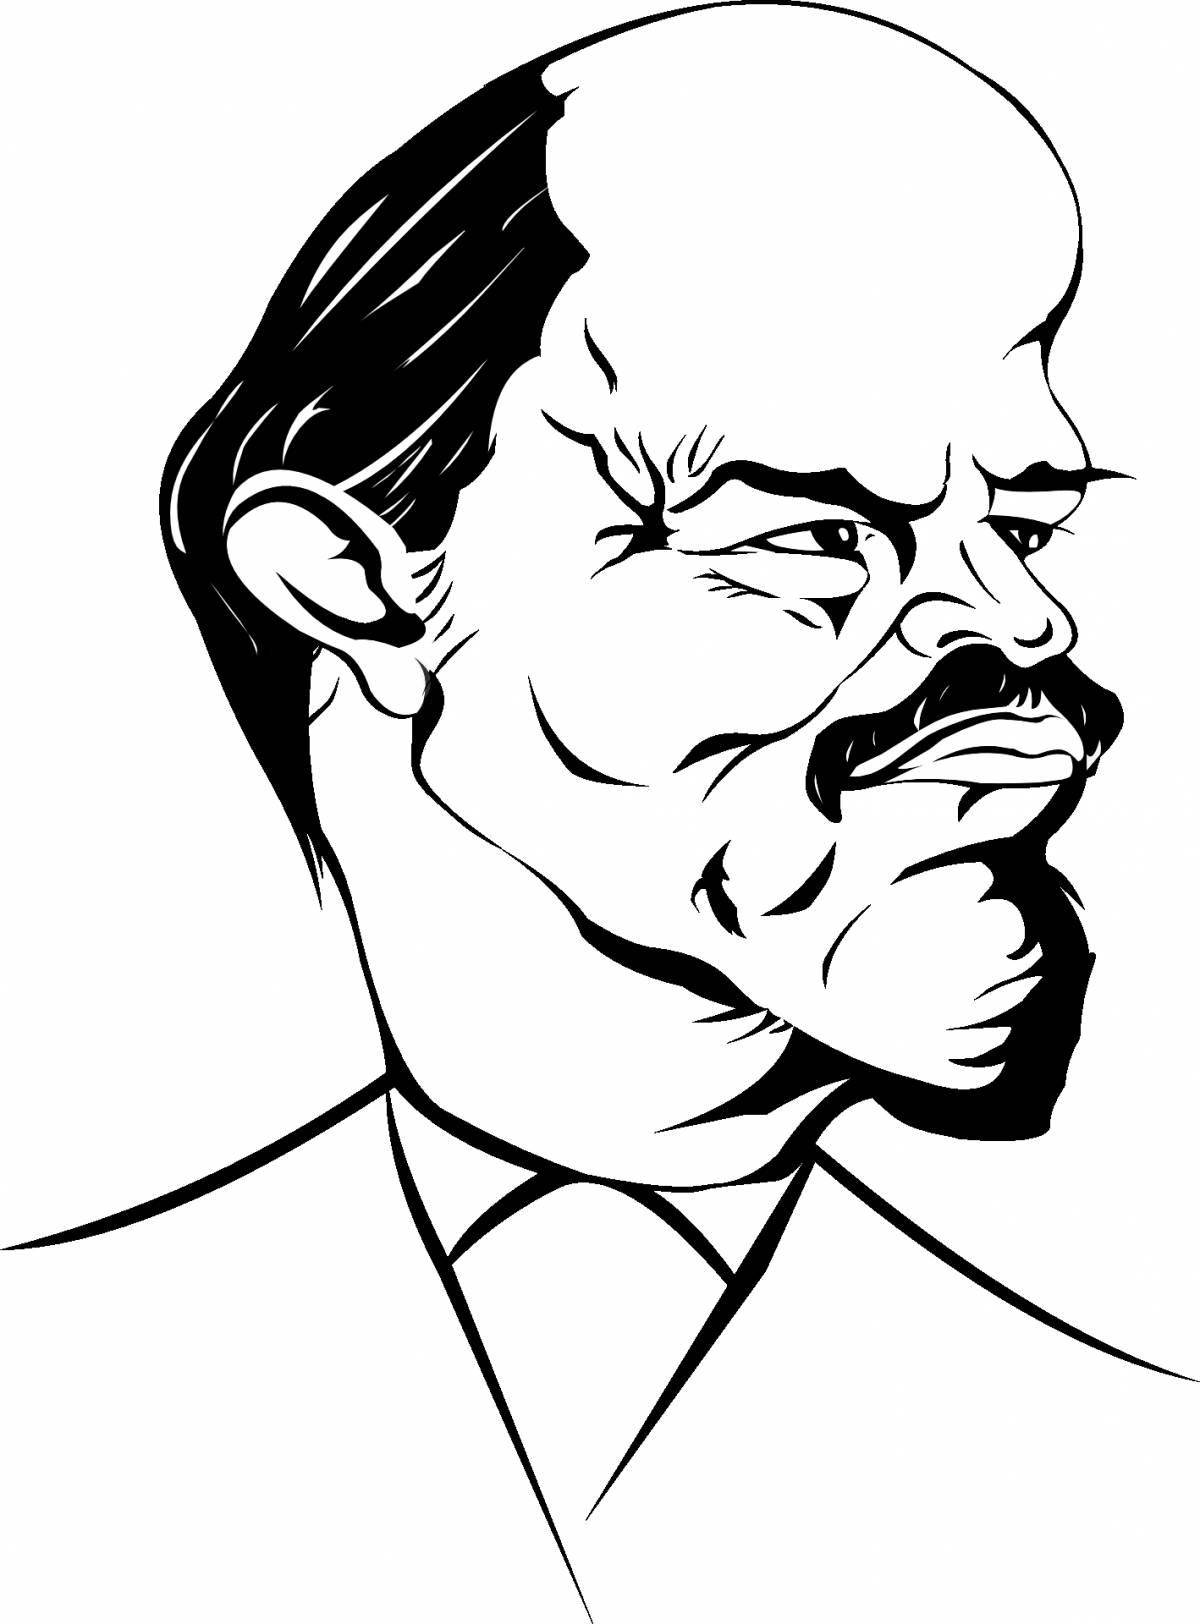 Lenin's playful coloring page